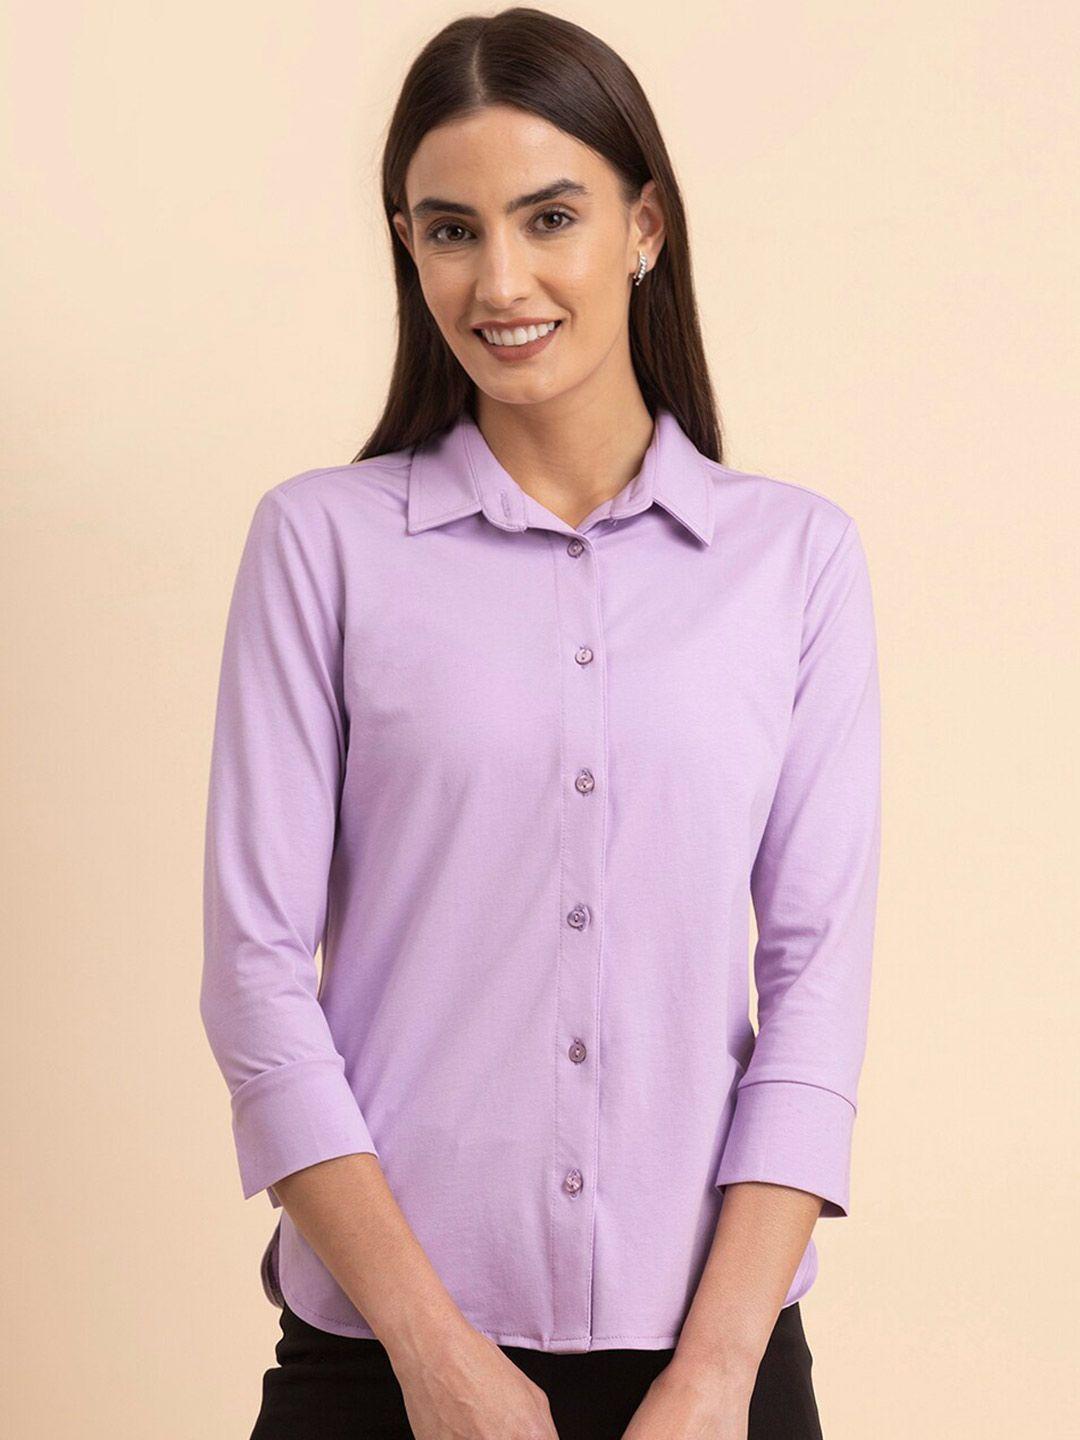 fablestreet-classic-casual-shirt